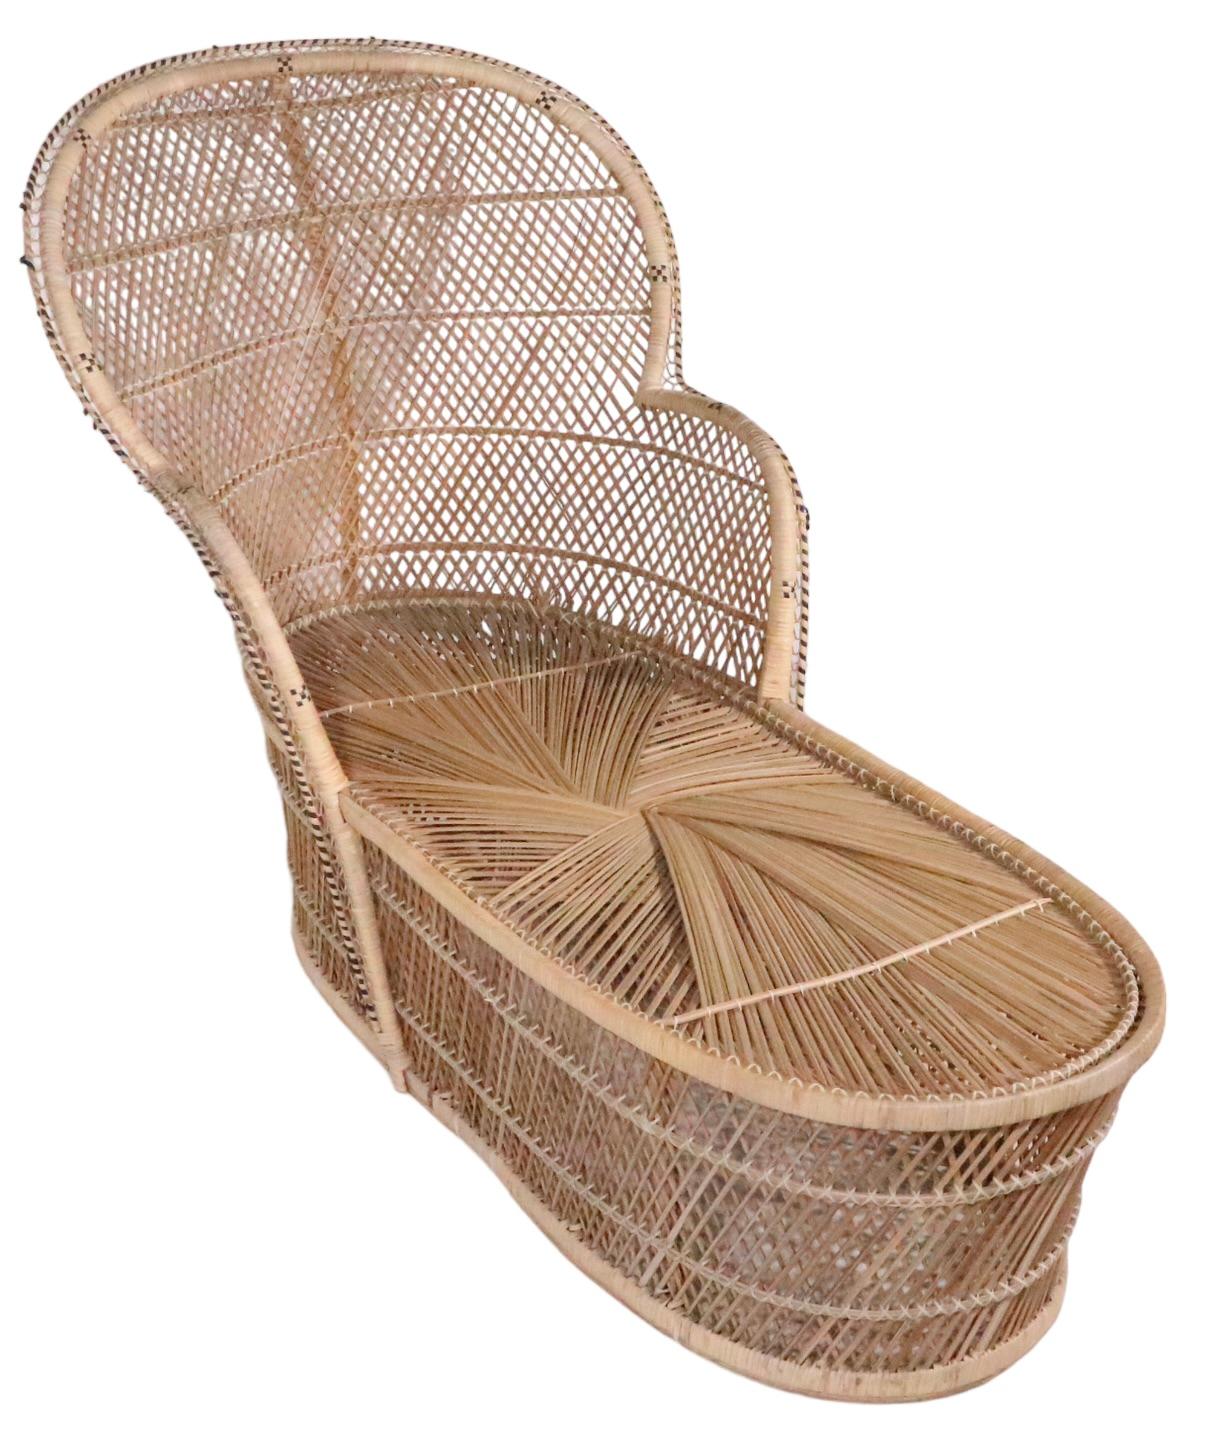 Late 20th Century Woven Wicker Peacock Style Chaise Lounge c 1970's For Sale